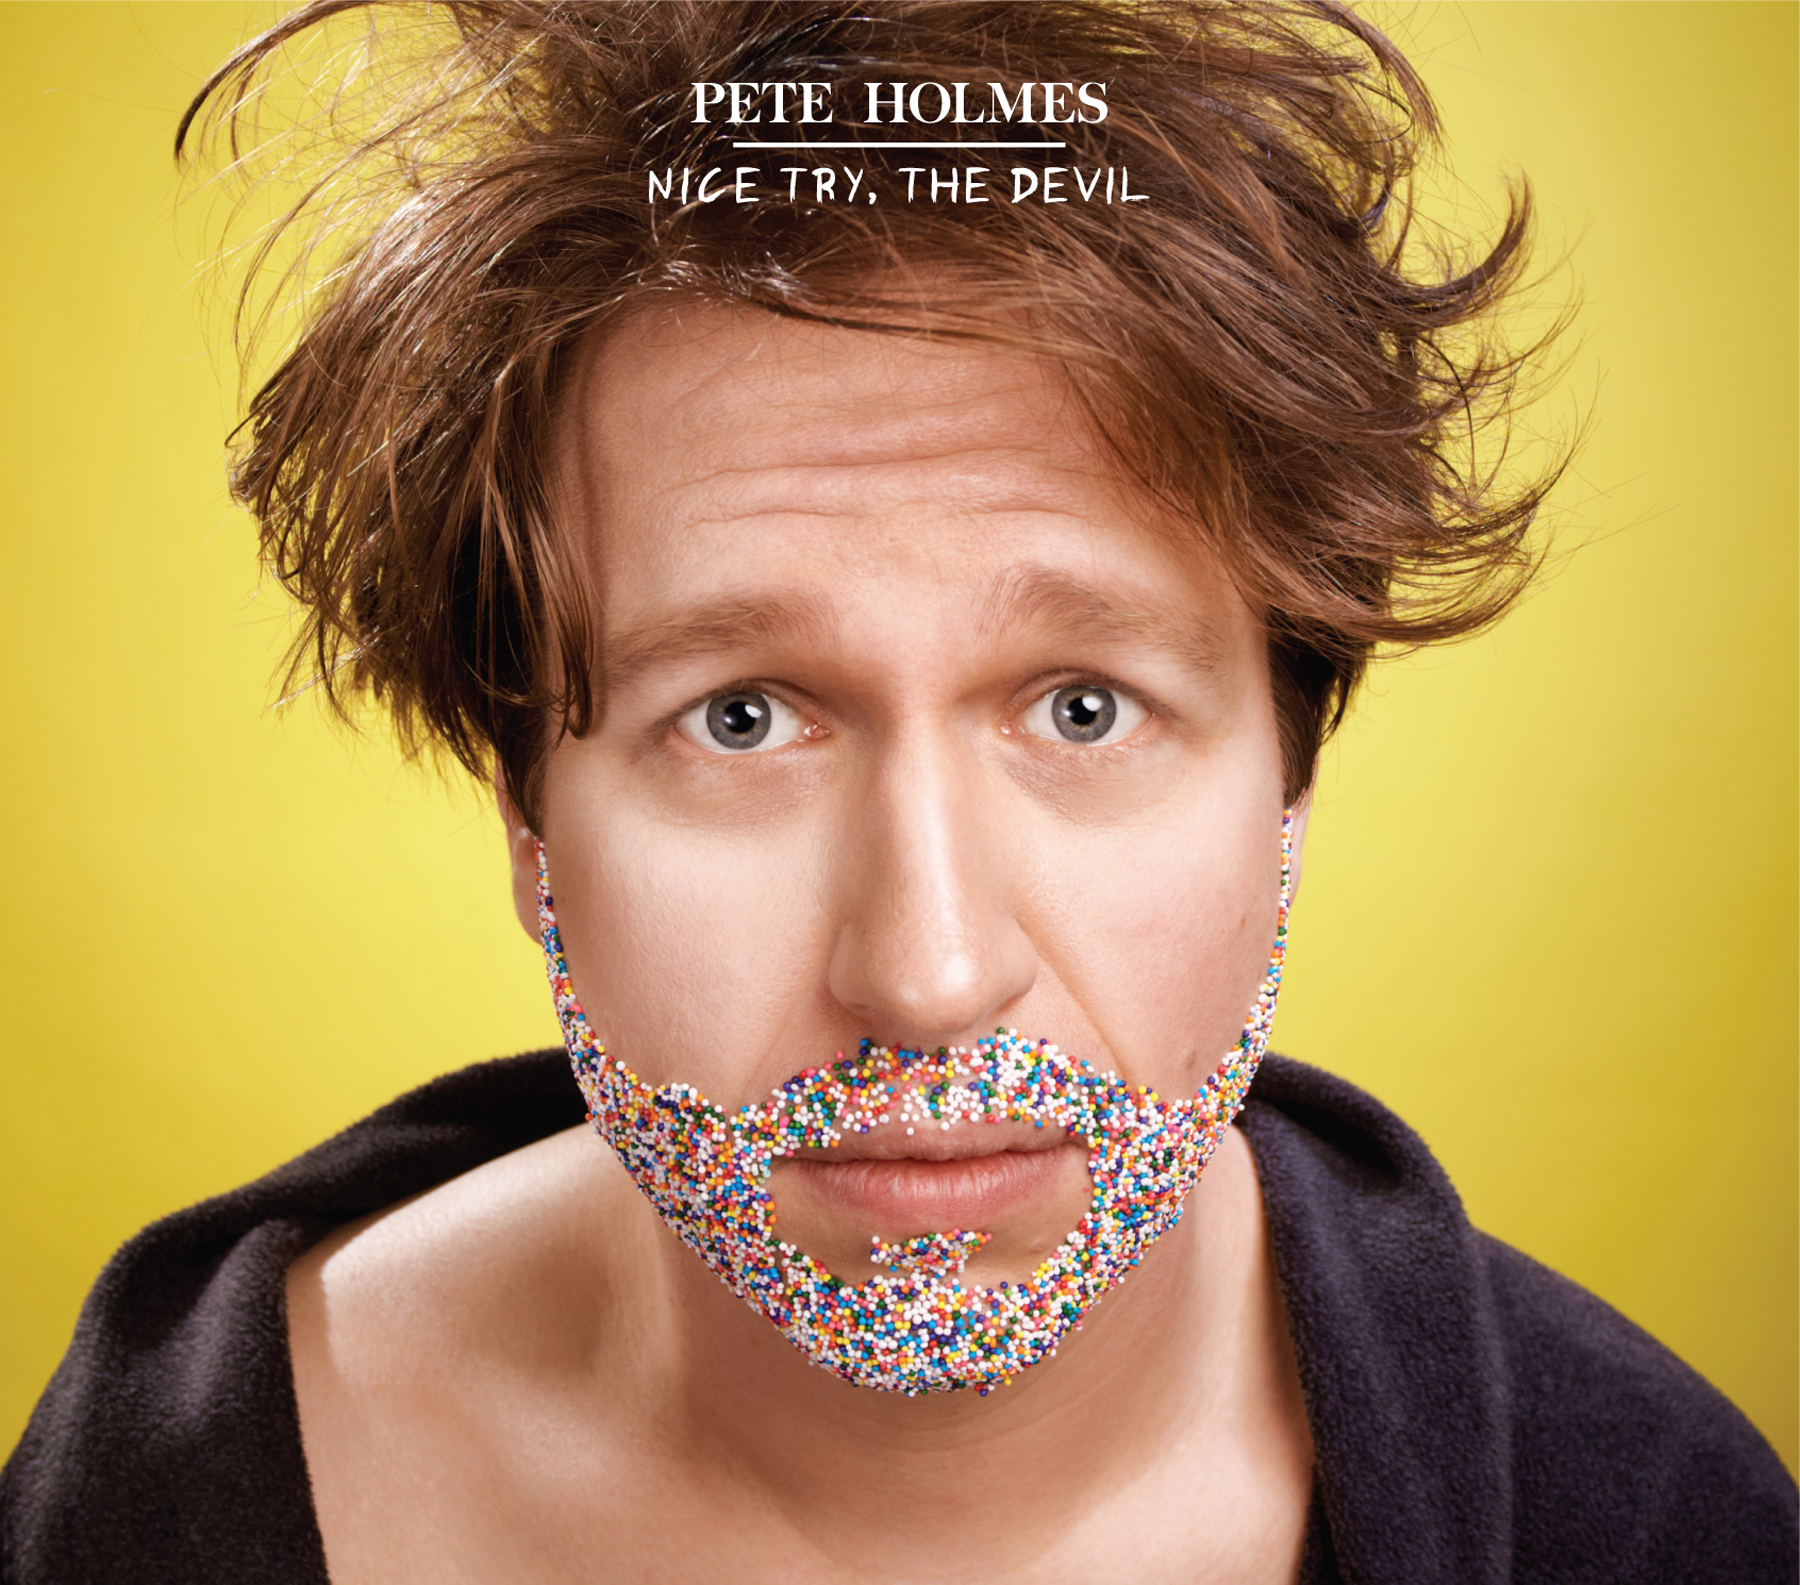 Pete Holmes - Nice try, The devil EP